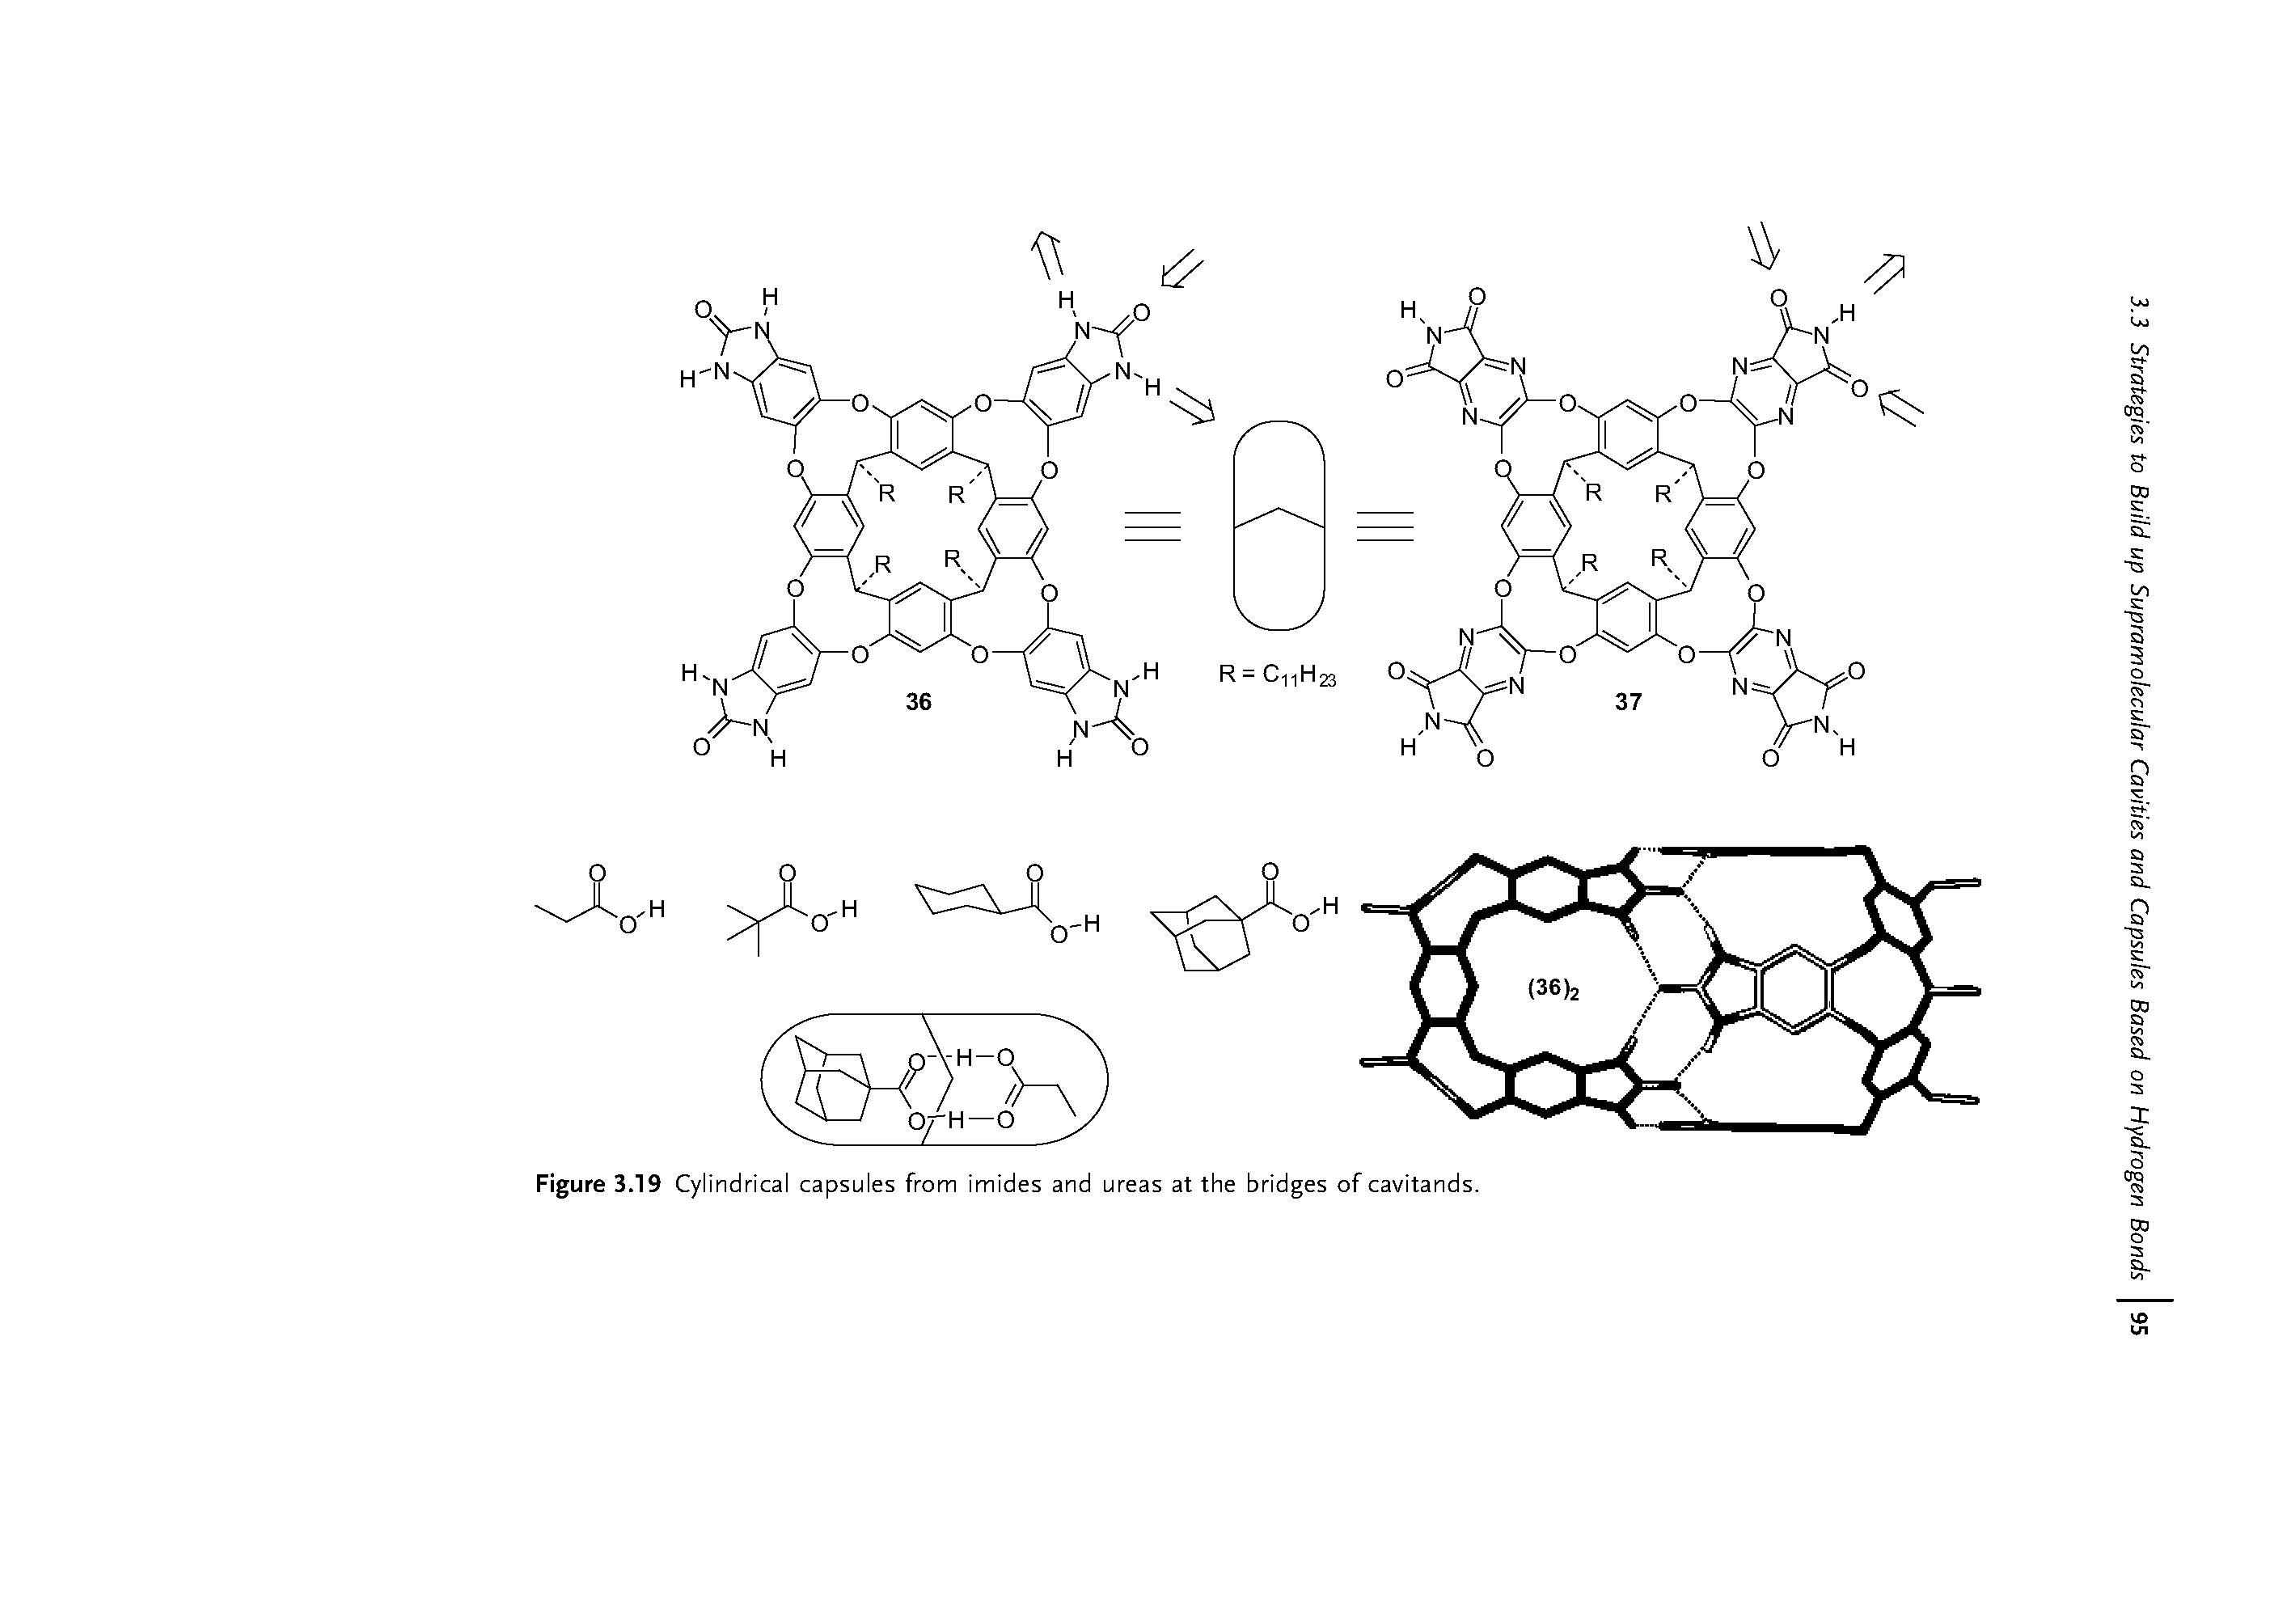 Figure 3.19 Cylindrical capsules from imides and ureas at the bridges of cavitands.